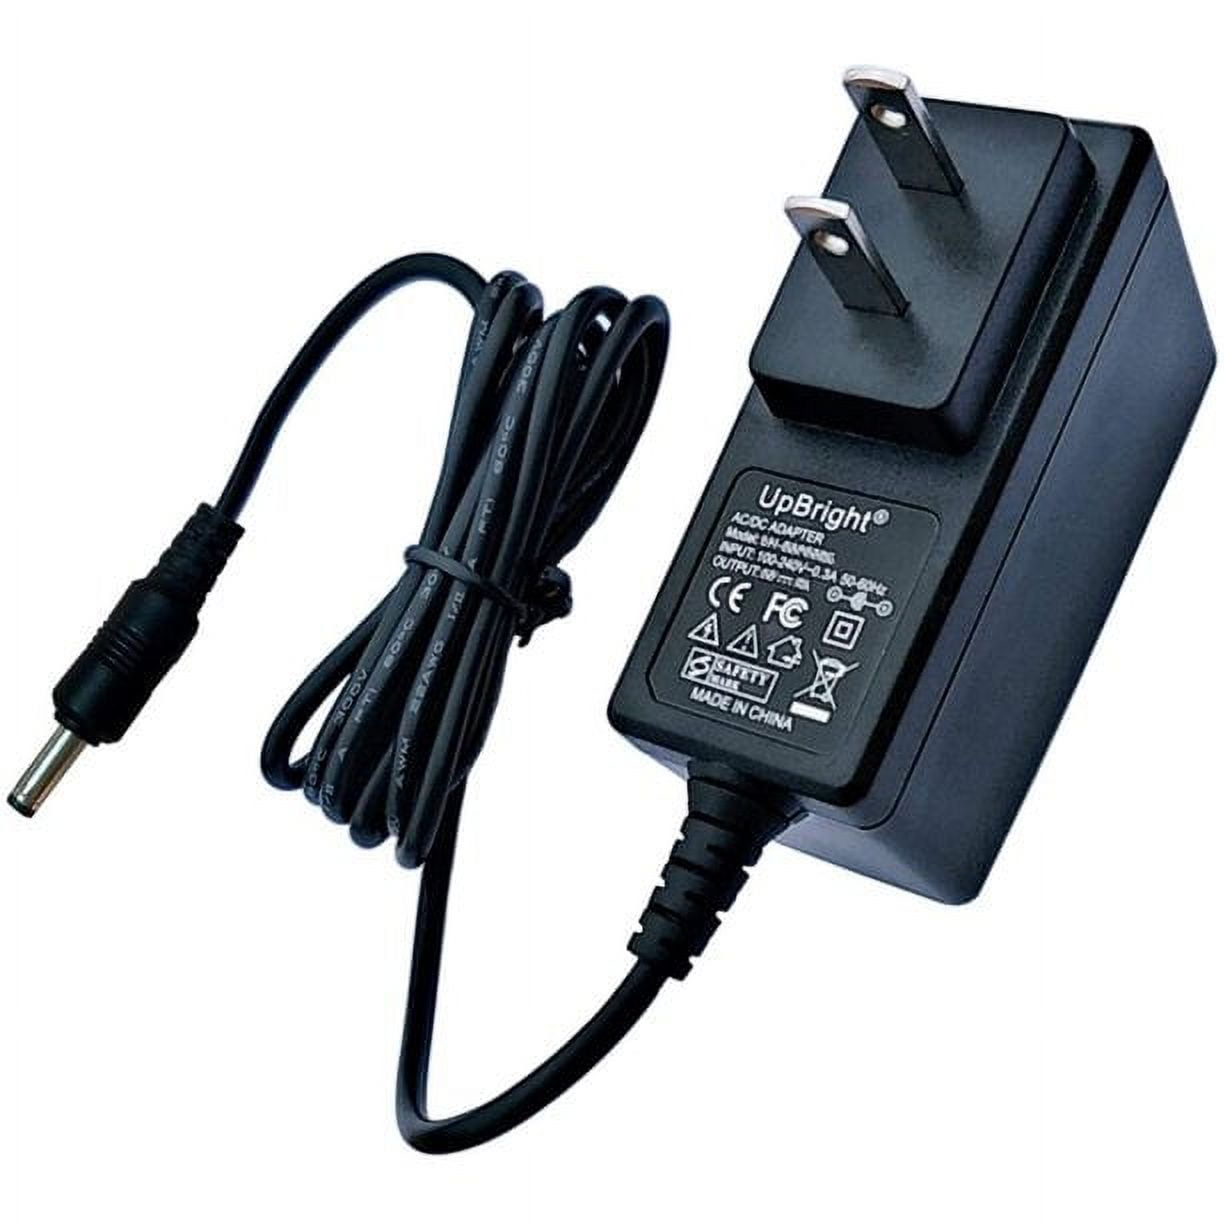 Power Adapter Wall Charger for Trekstor Surftab Wintron 10.1